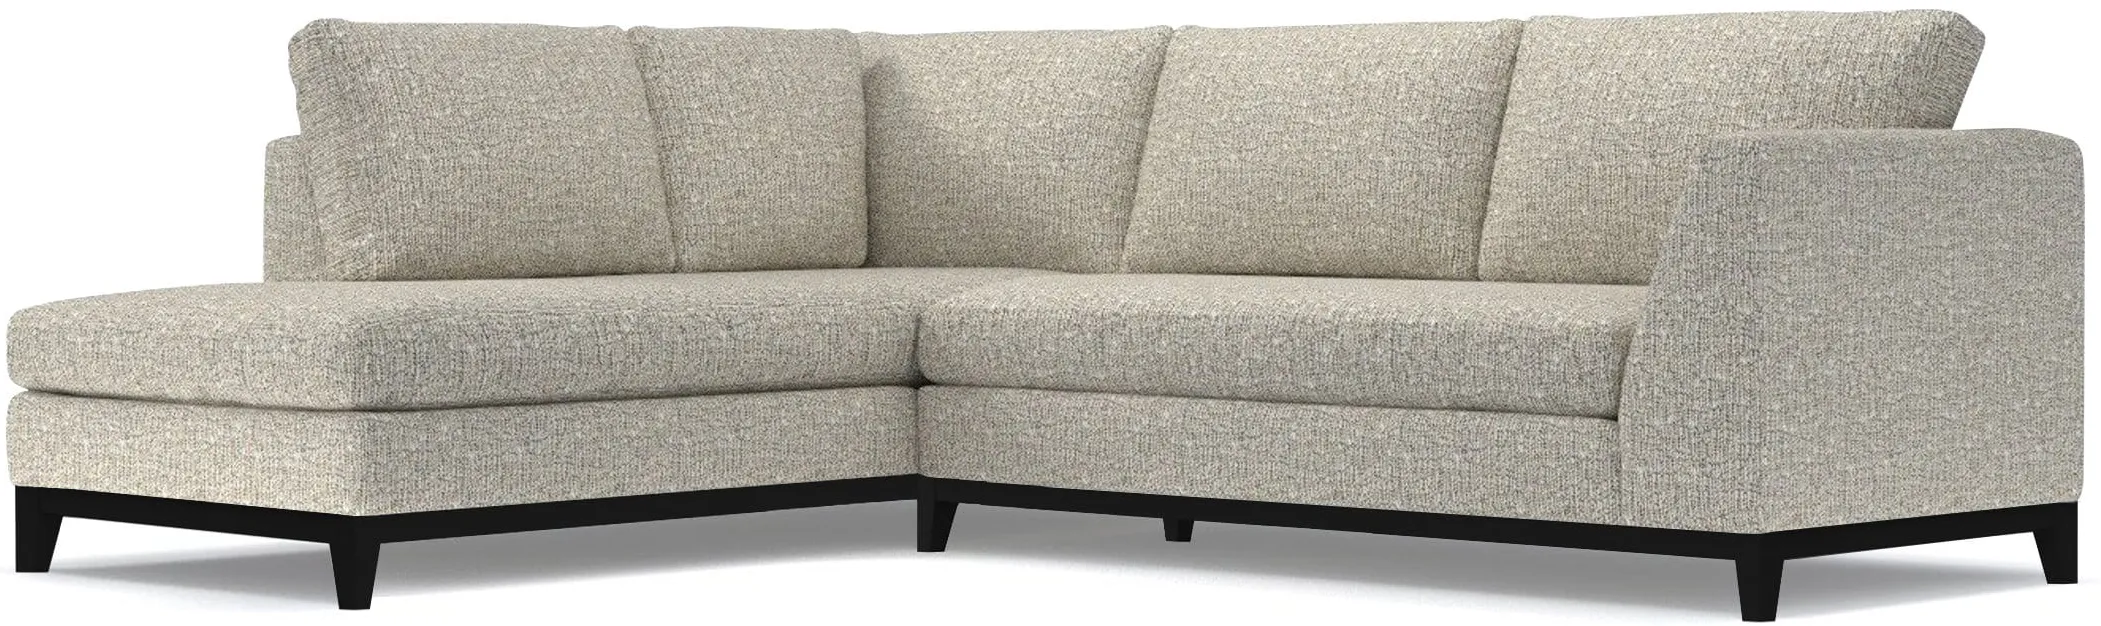 Mulholland Drive 2pc Sleeper Sectional